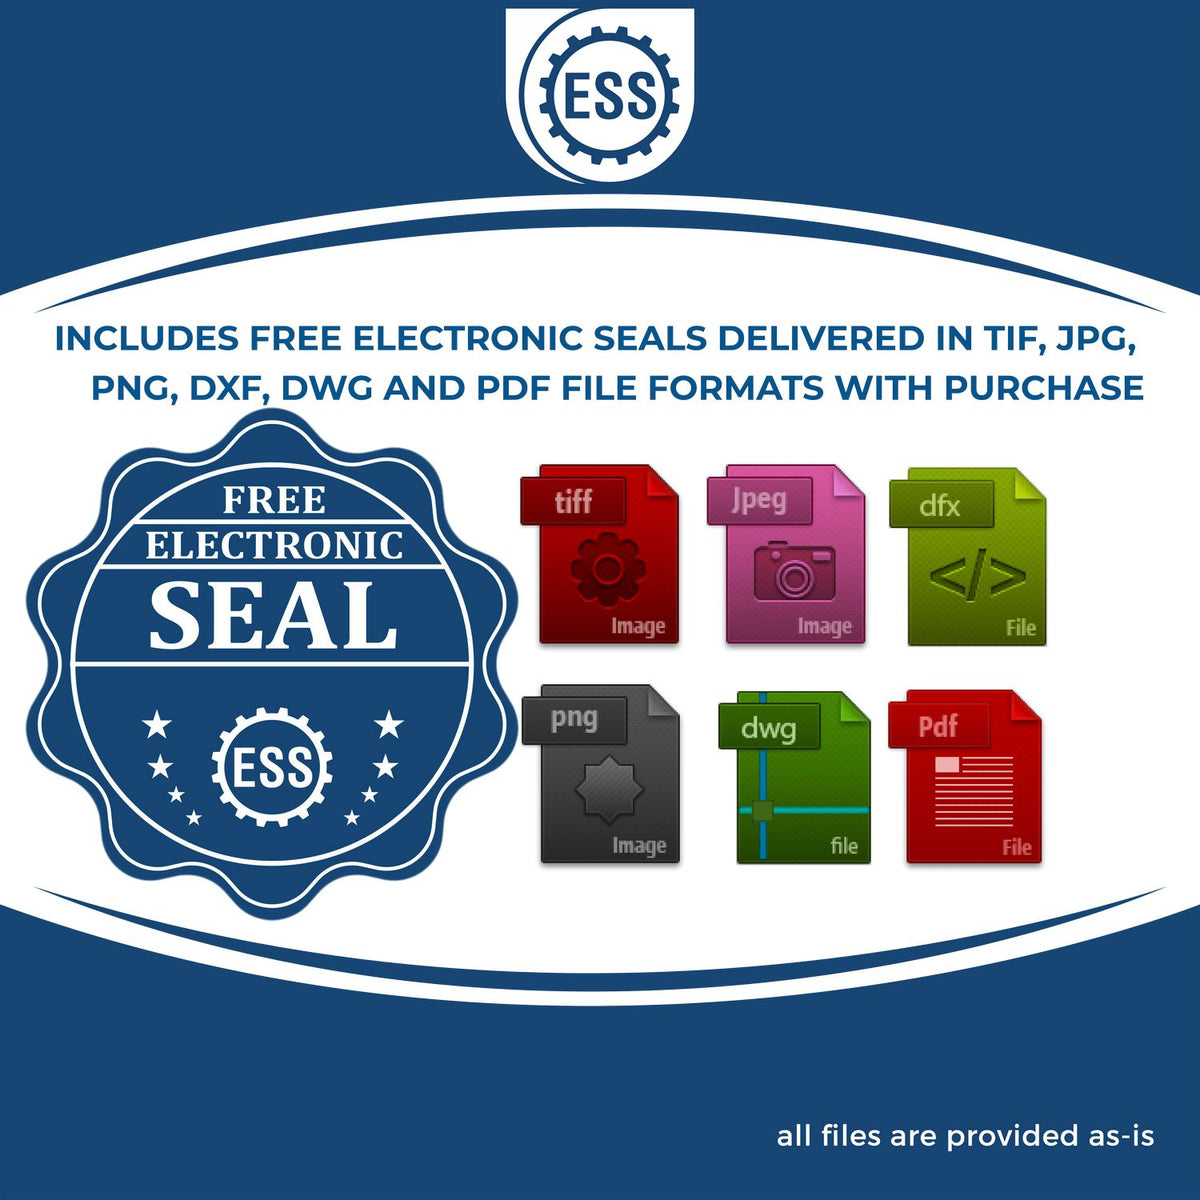 An infographic for the free electronic seal for the Soft Wyoming Professional Engineer Seal illustrating the different file type icons such as DXF, DWG, TIF, JPG and PNG.